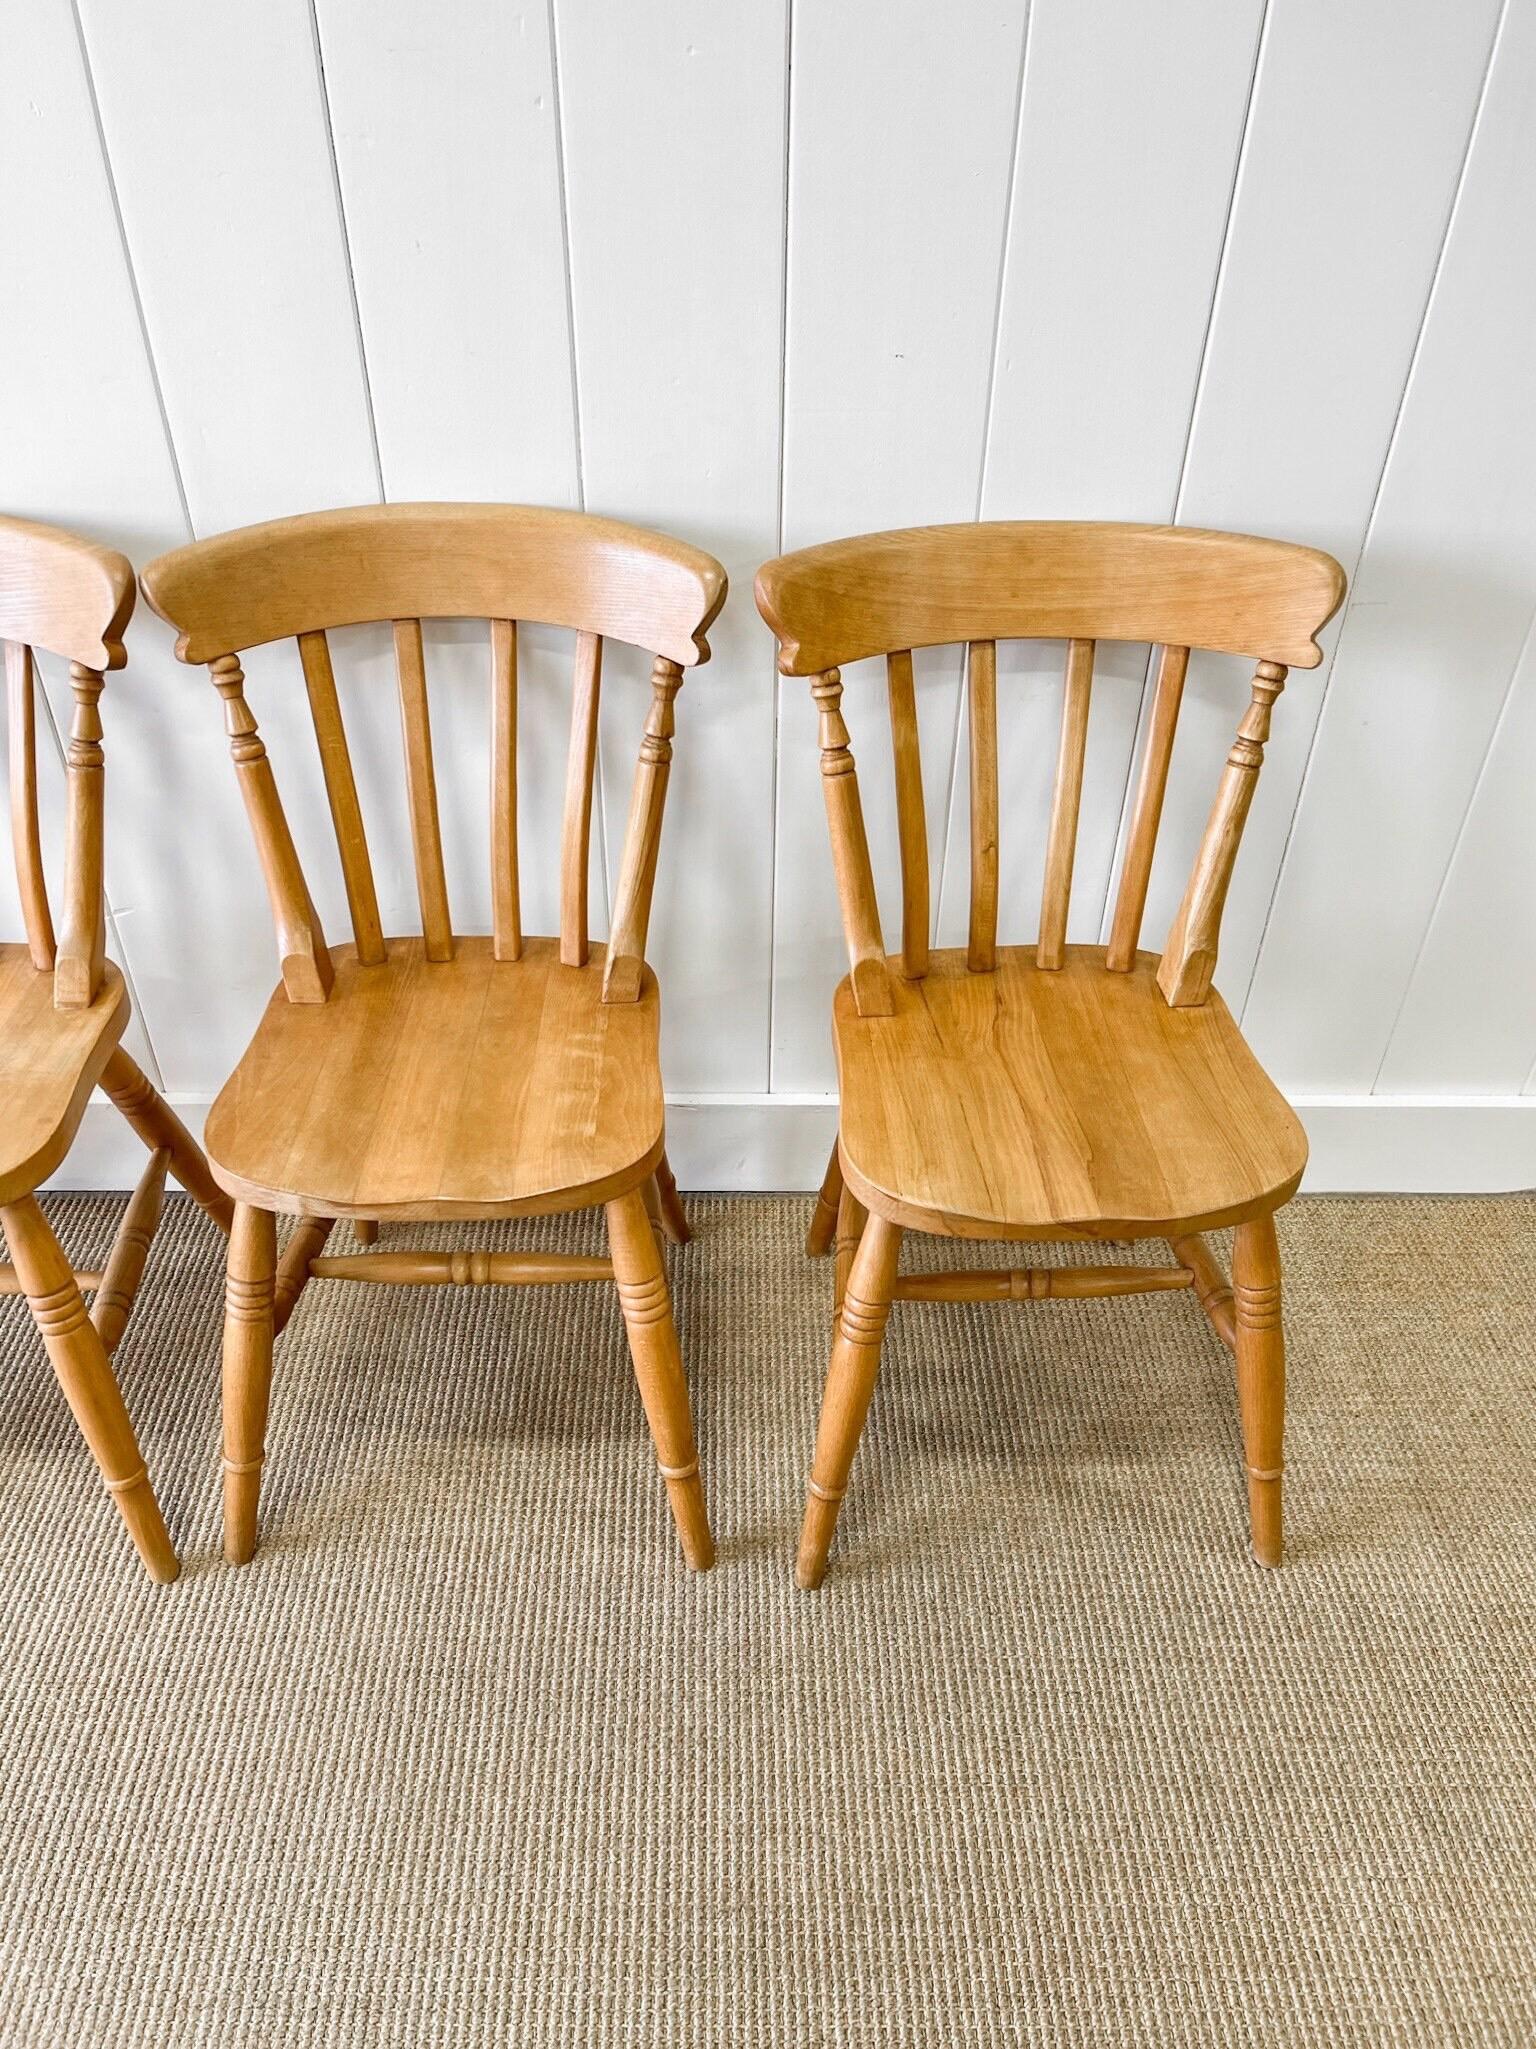 Victorian A Vintage Set of 4 Slat Back Chairs For Sale